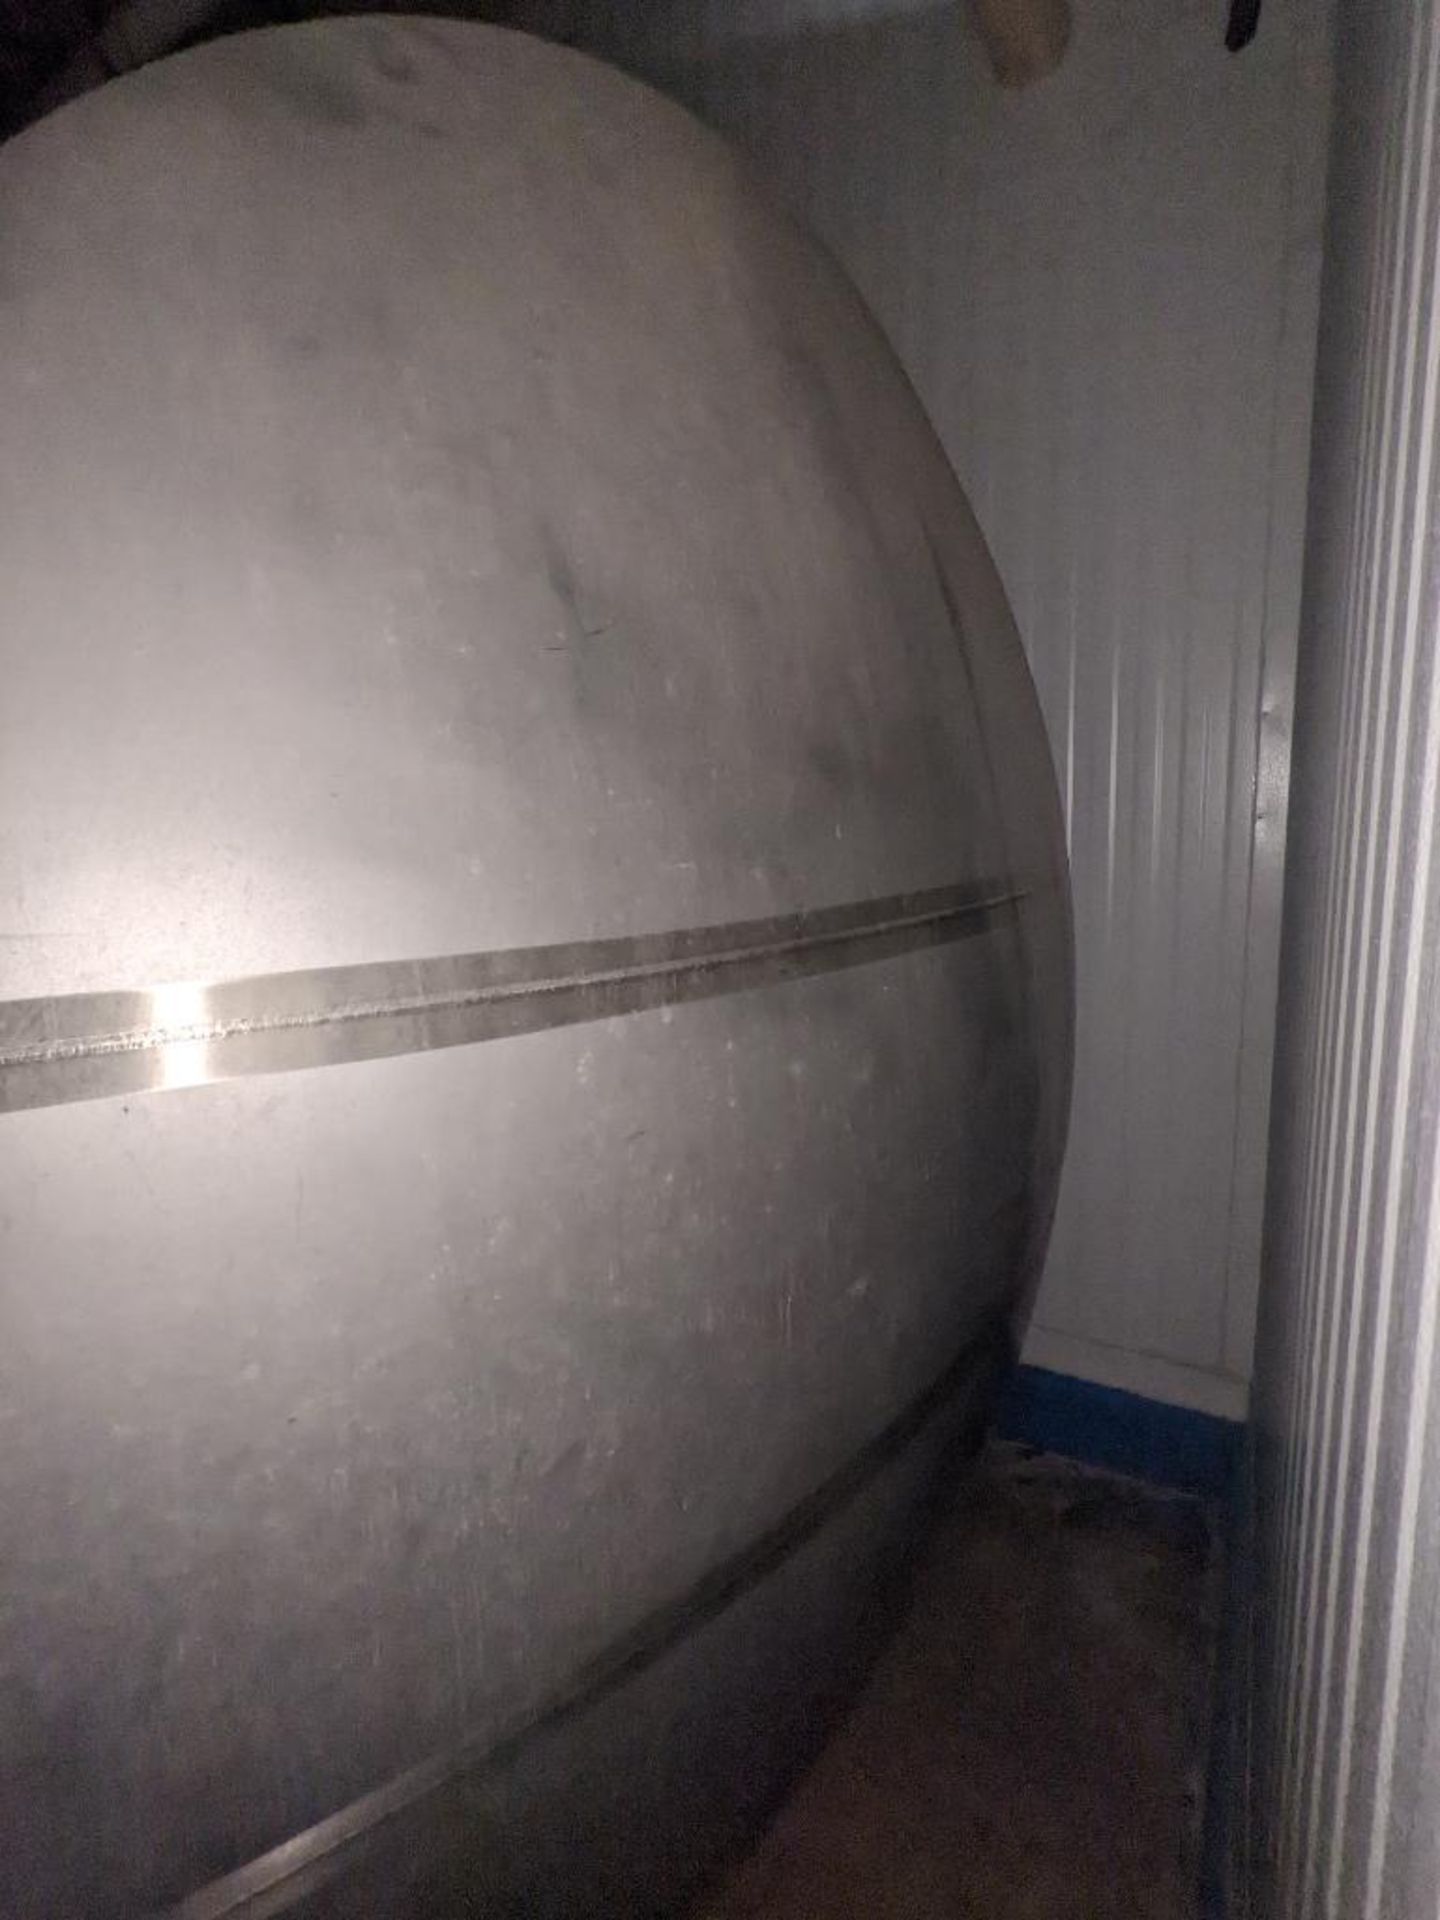 2006 Walker 8000 gallon SS horizontal jacketed holding tank - Image 14 of 22